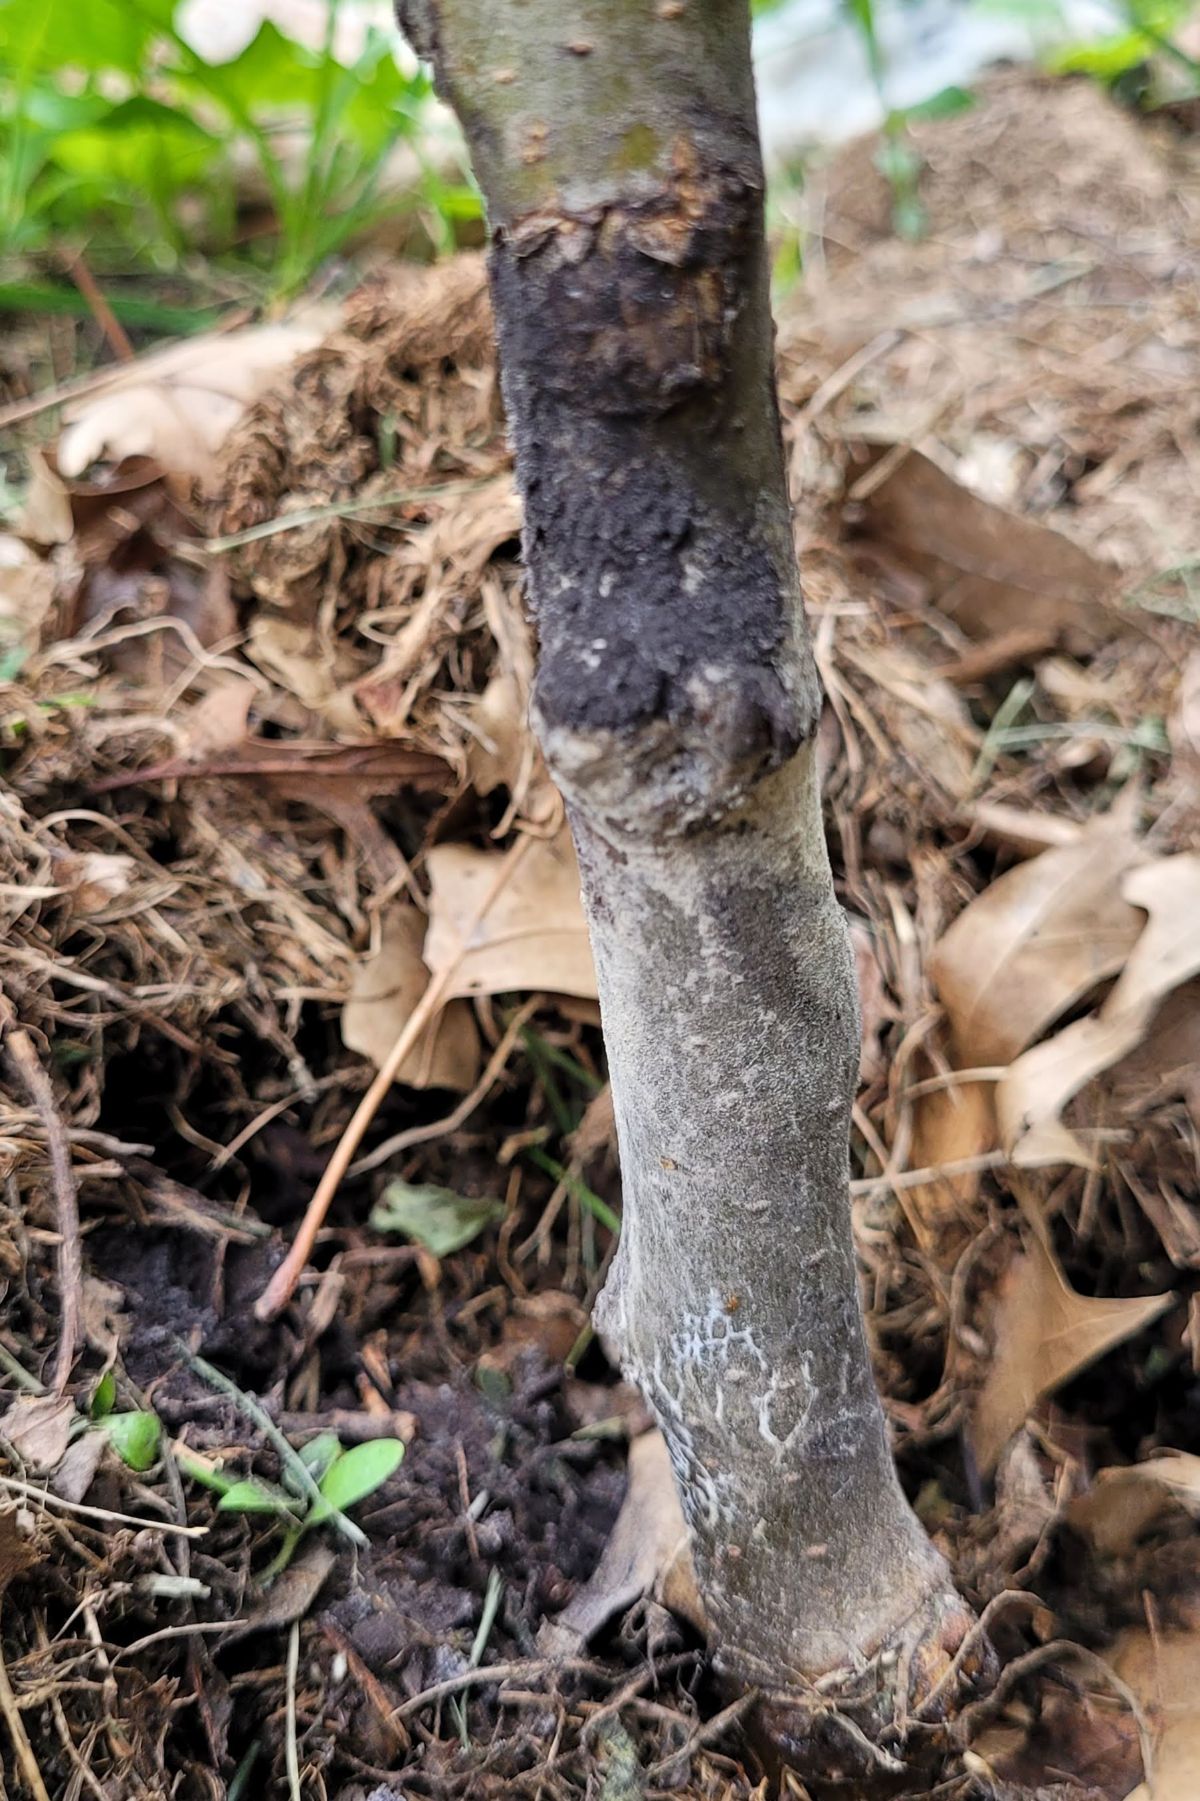 Fungus growing on a new tree trunk